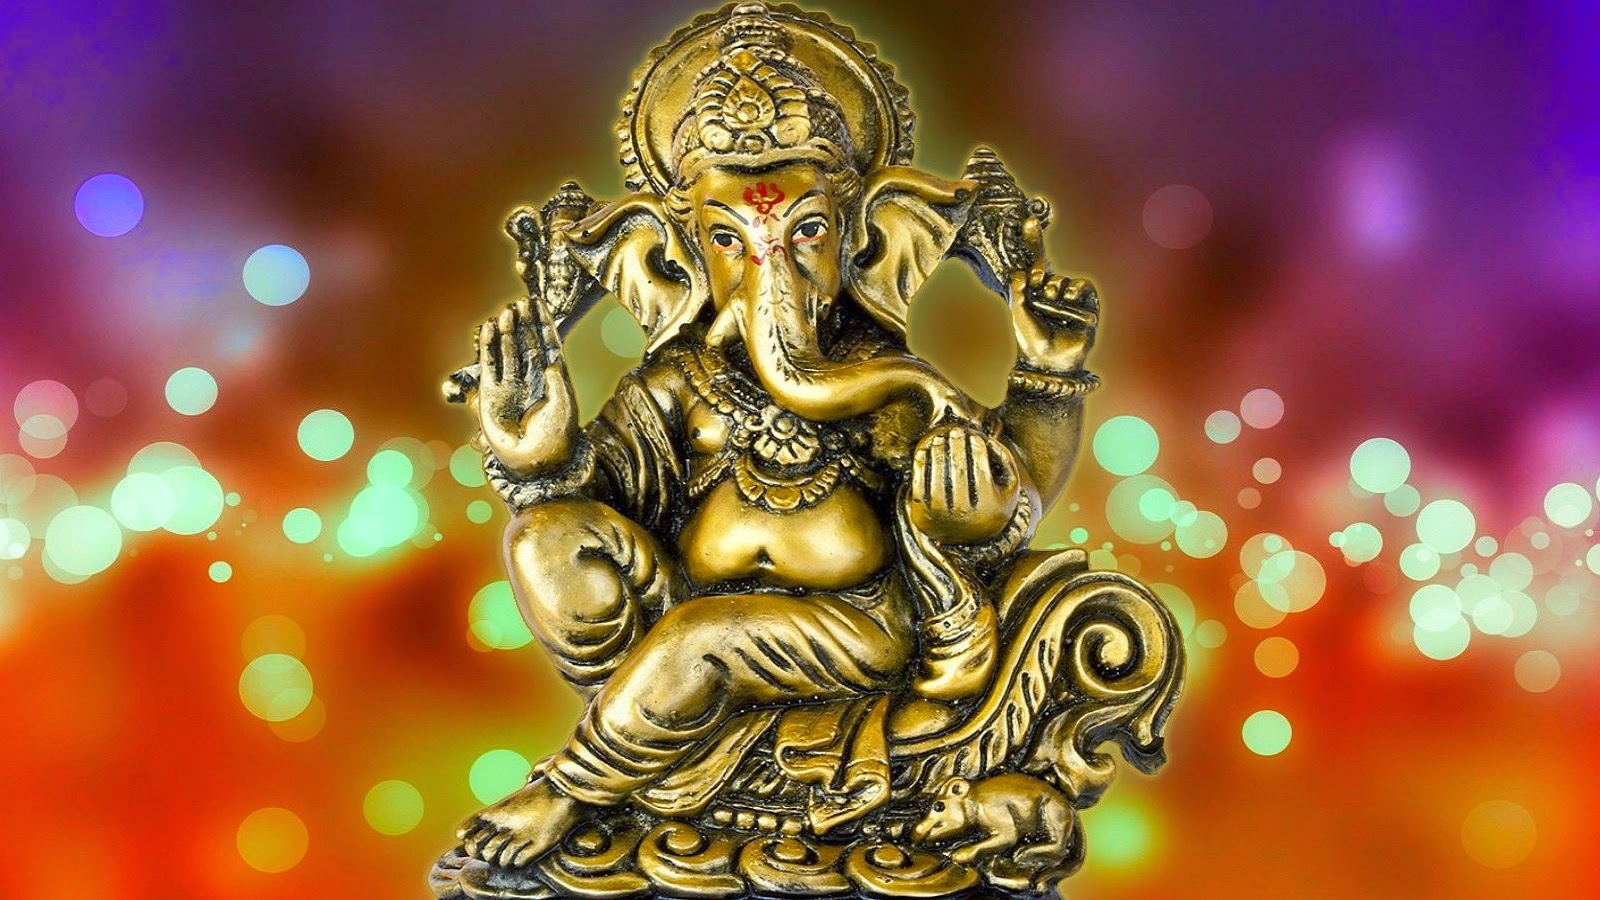 Lord vinayaka swamy HD wallpapers Images Pictures photos Gallery Free  Download | Hindu God Image 